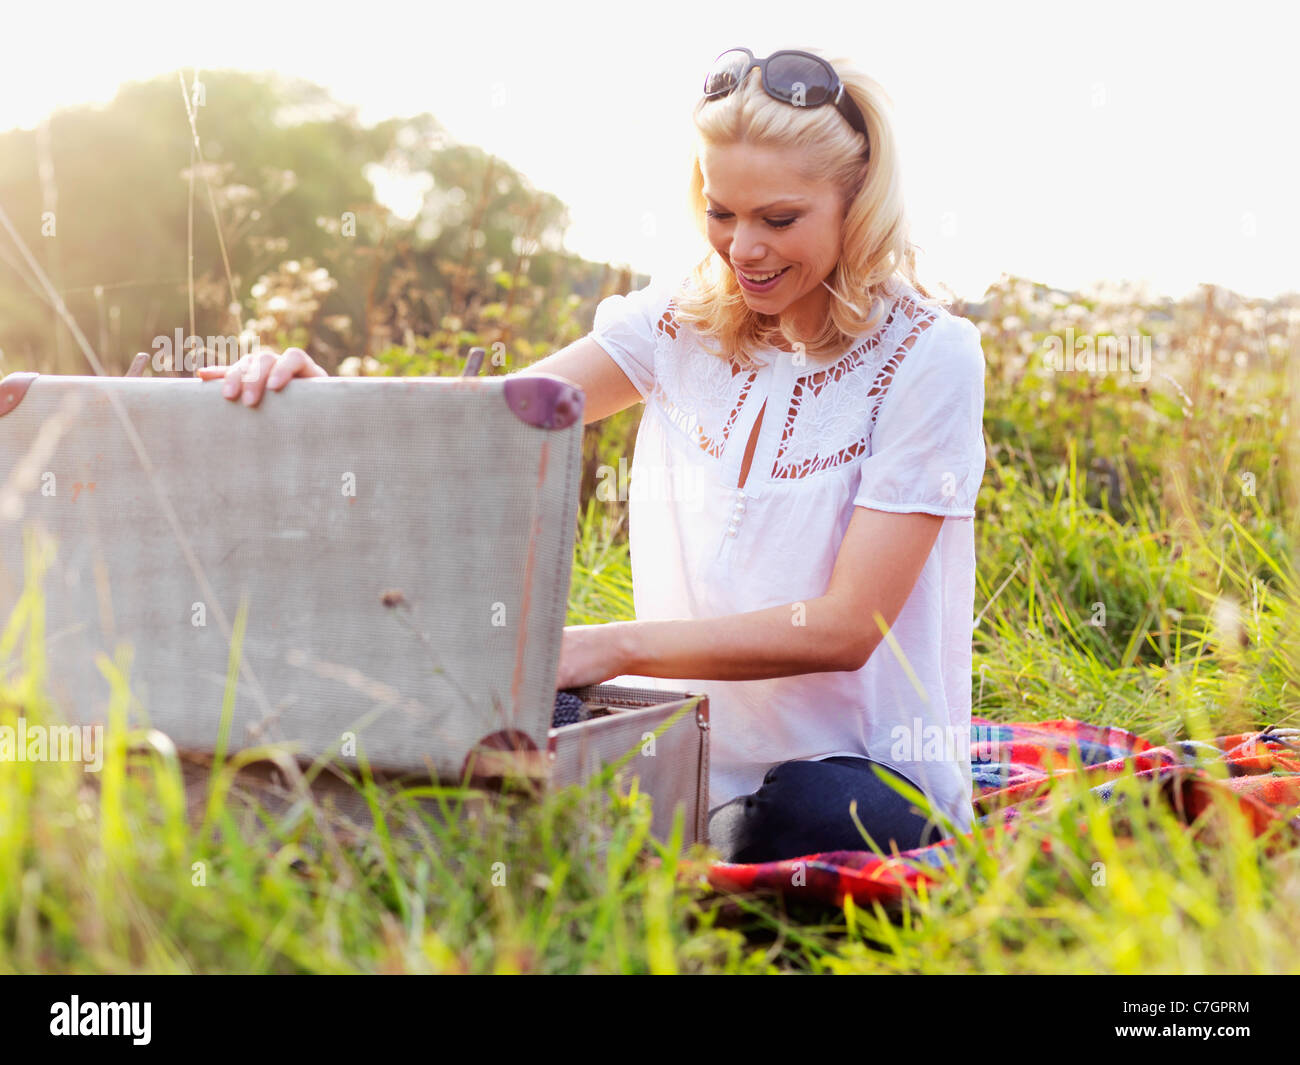 A woman sitting in the grass rummaging through an open suitcase Stock Photo